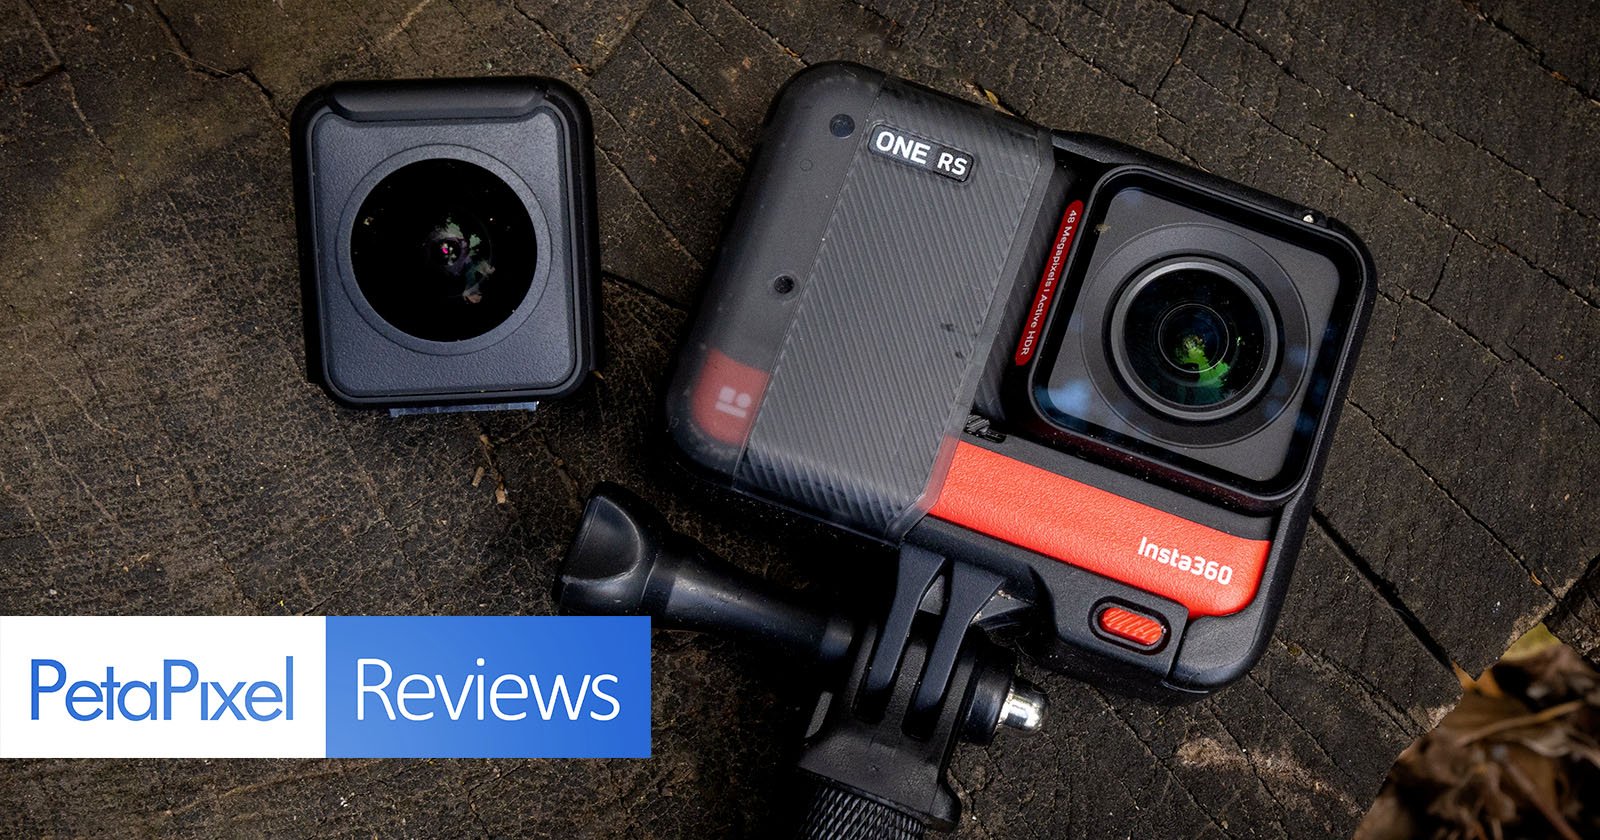 https://petapixel.com/assets/uploads/2022/06/Insta360-One-RS-Review-Not-Perfect-But-Lots-to-Love.jpg